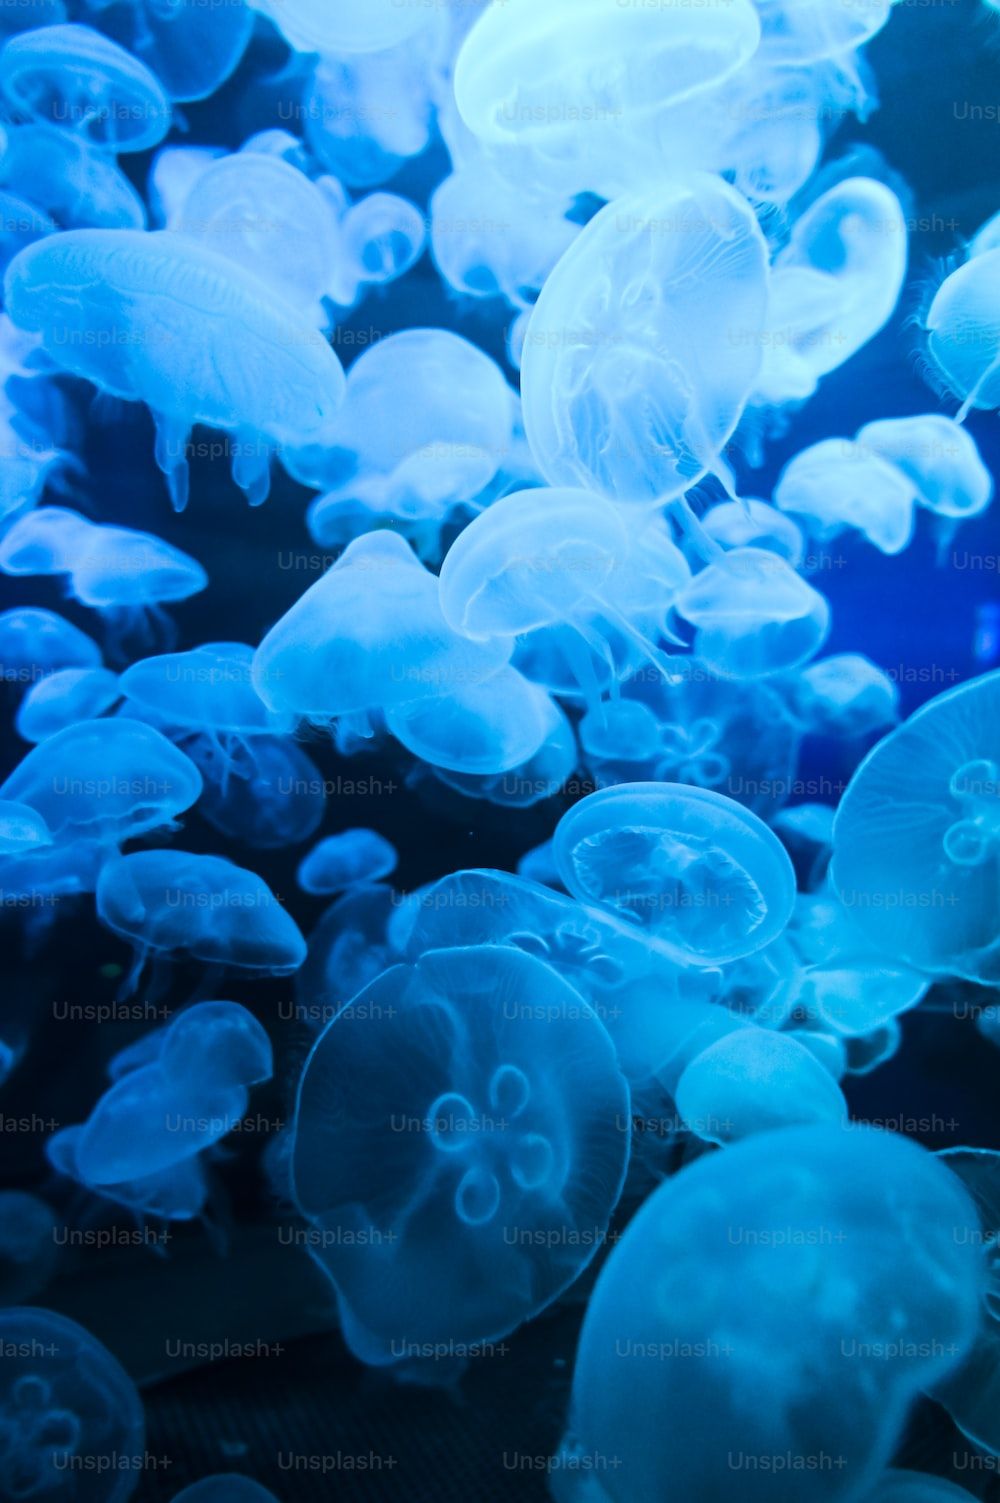 Moon jellyfishes floating in the ocean under blue light - Jellyfish